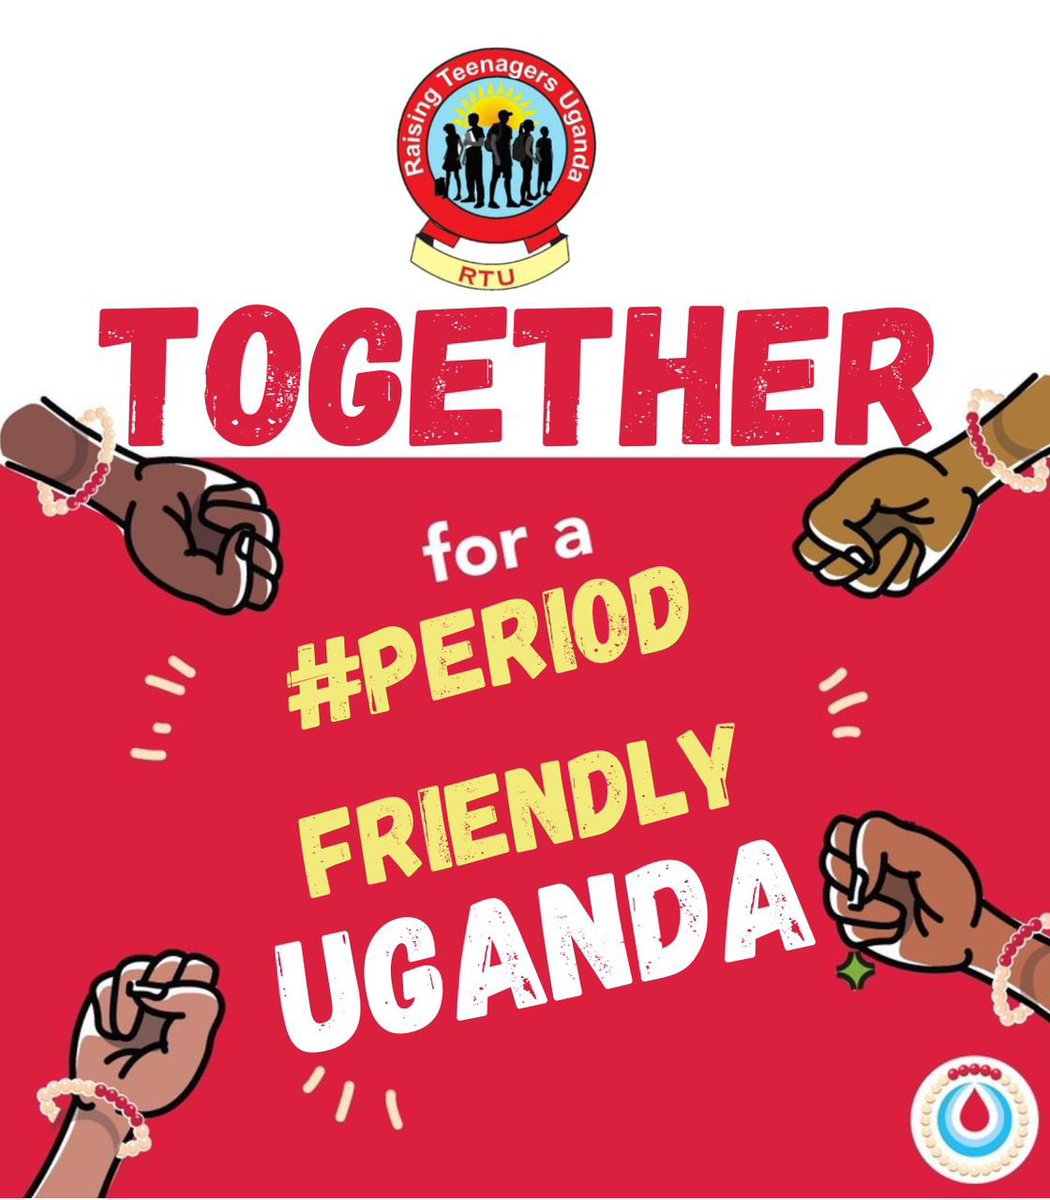 From health risks to missed school days, menstruation affects us all. It's time to break the silence and create a #PeriodFriendlyWorld. Join us this July for #Hike4GirlsUg, as we hike to break the stigma surrounding menstruation. Your support matters @RaisingTeensUg2